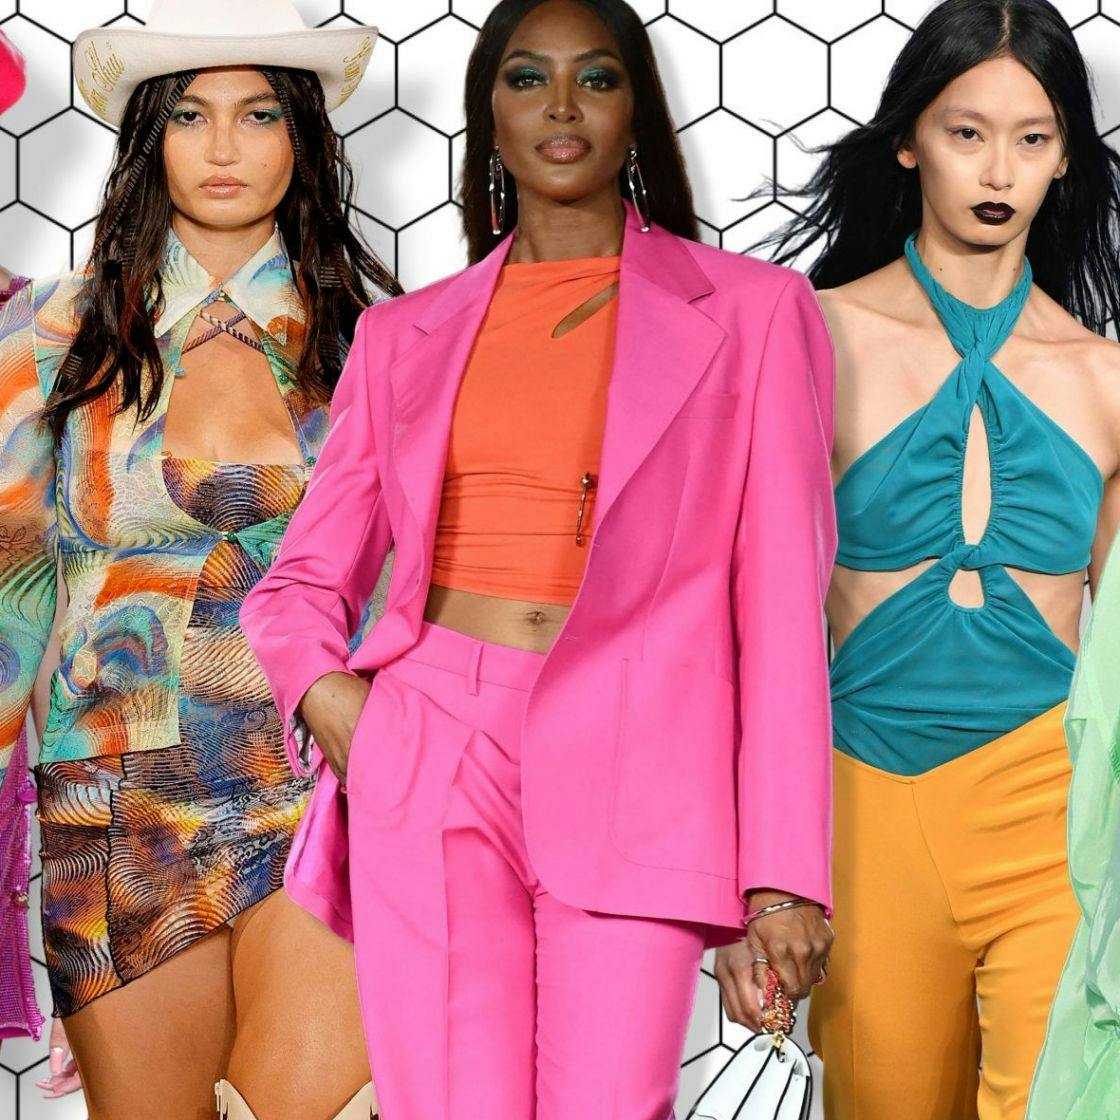 The 10 best Spring Summer 2022 fashion trends as seen on the runway.